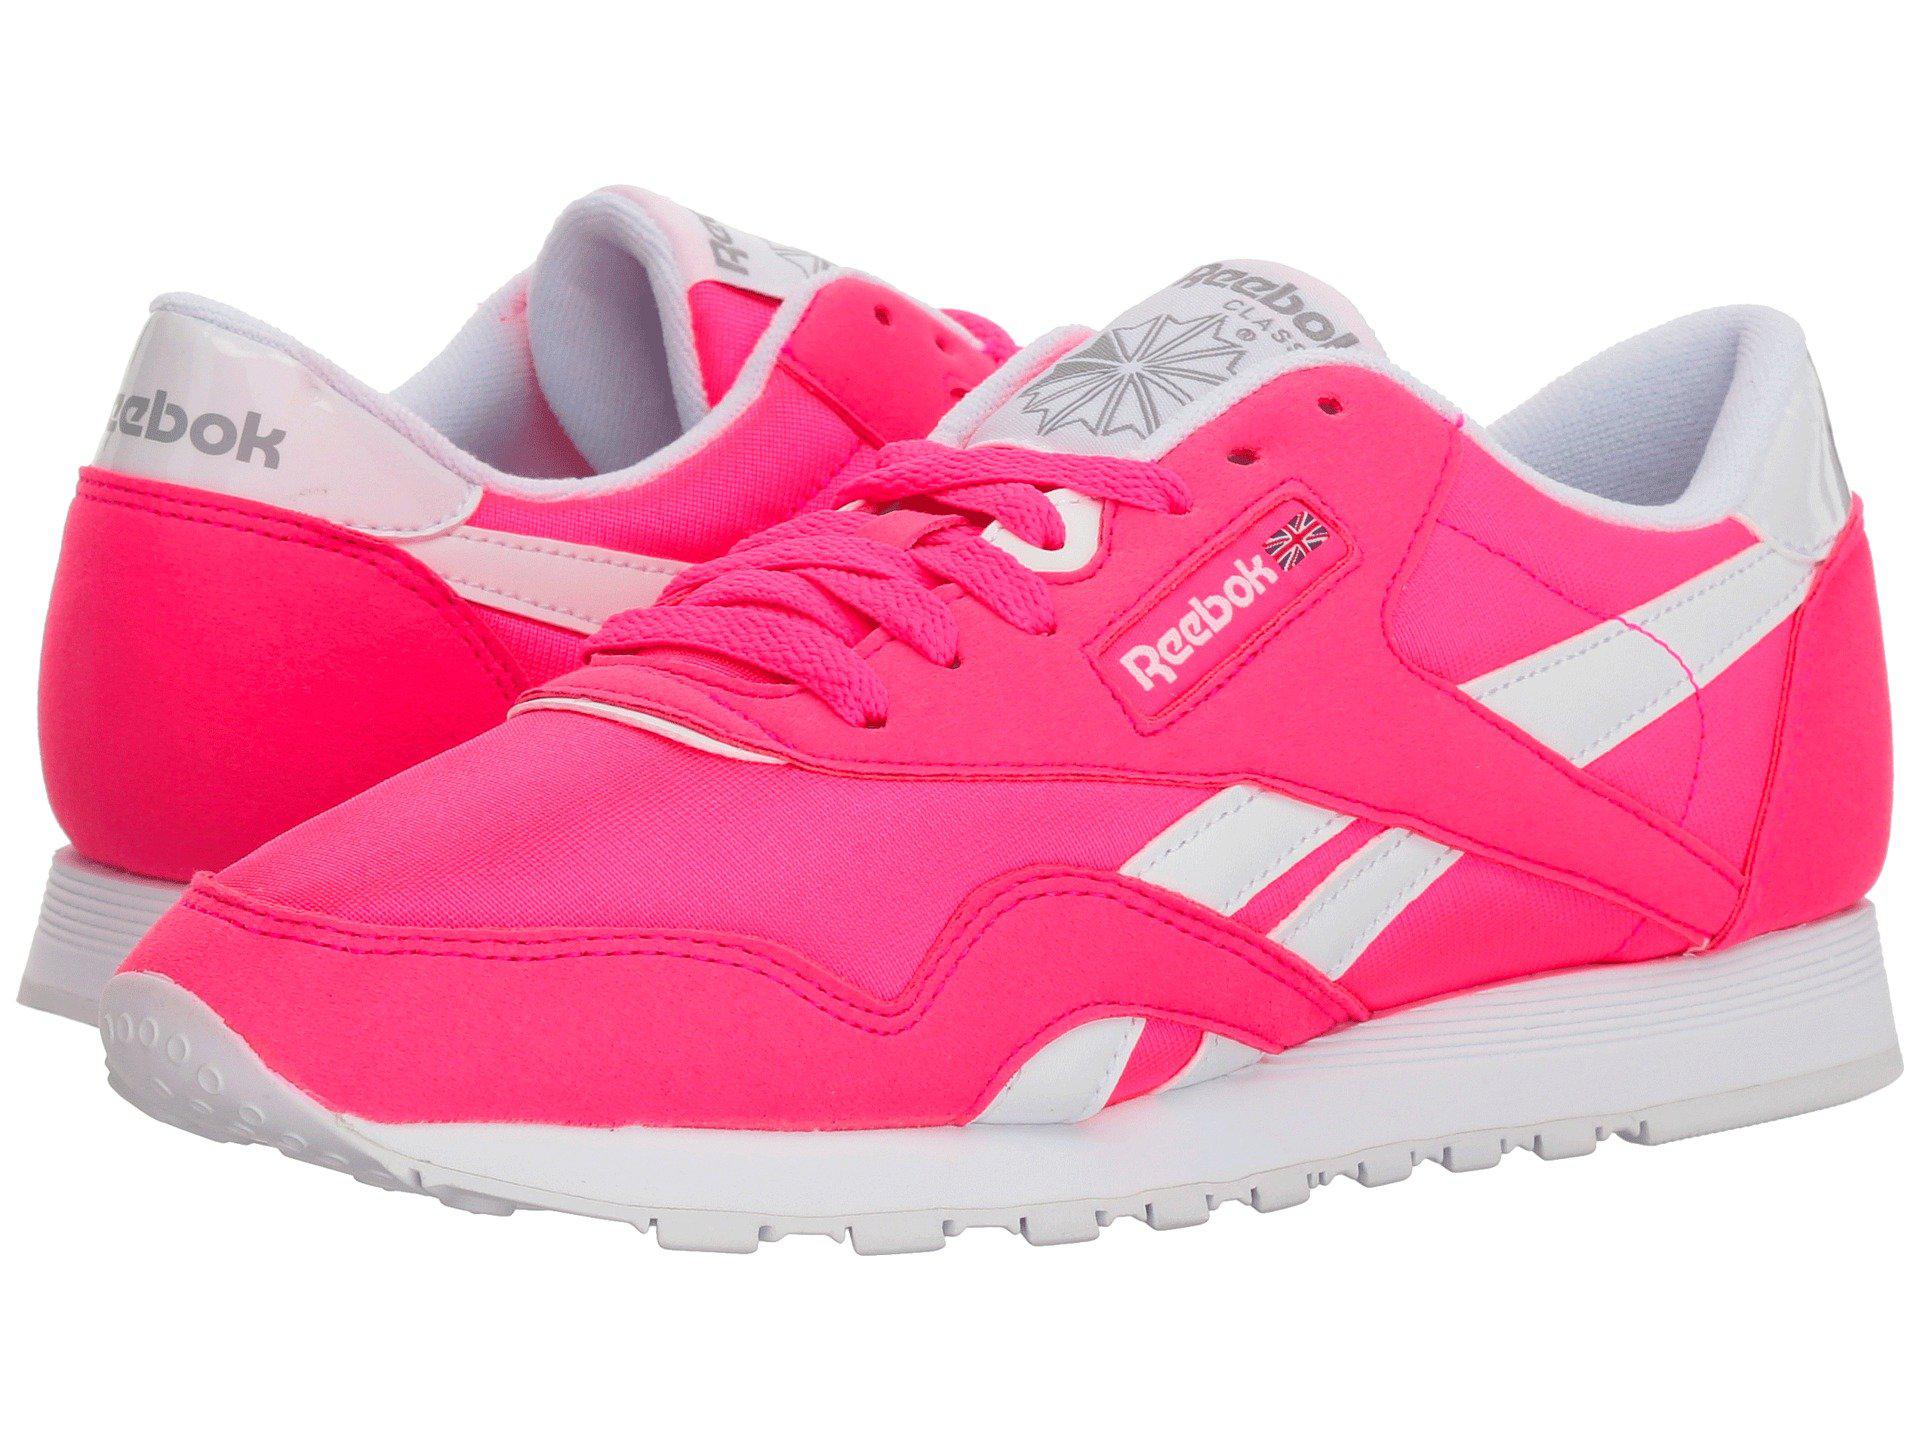 Reebok Synthetic Cl Nylon Brights Sneaker in Acid Pink/White (Pink) | Lyst